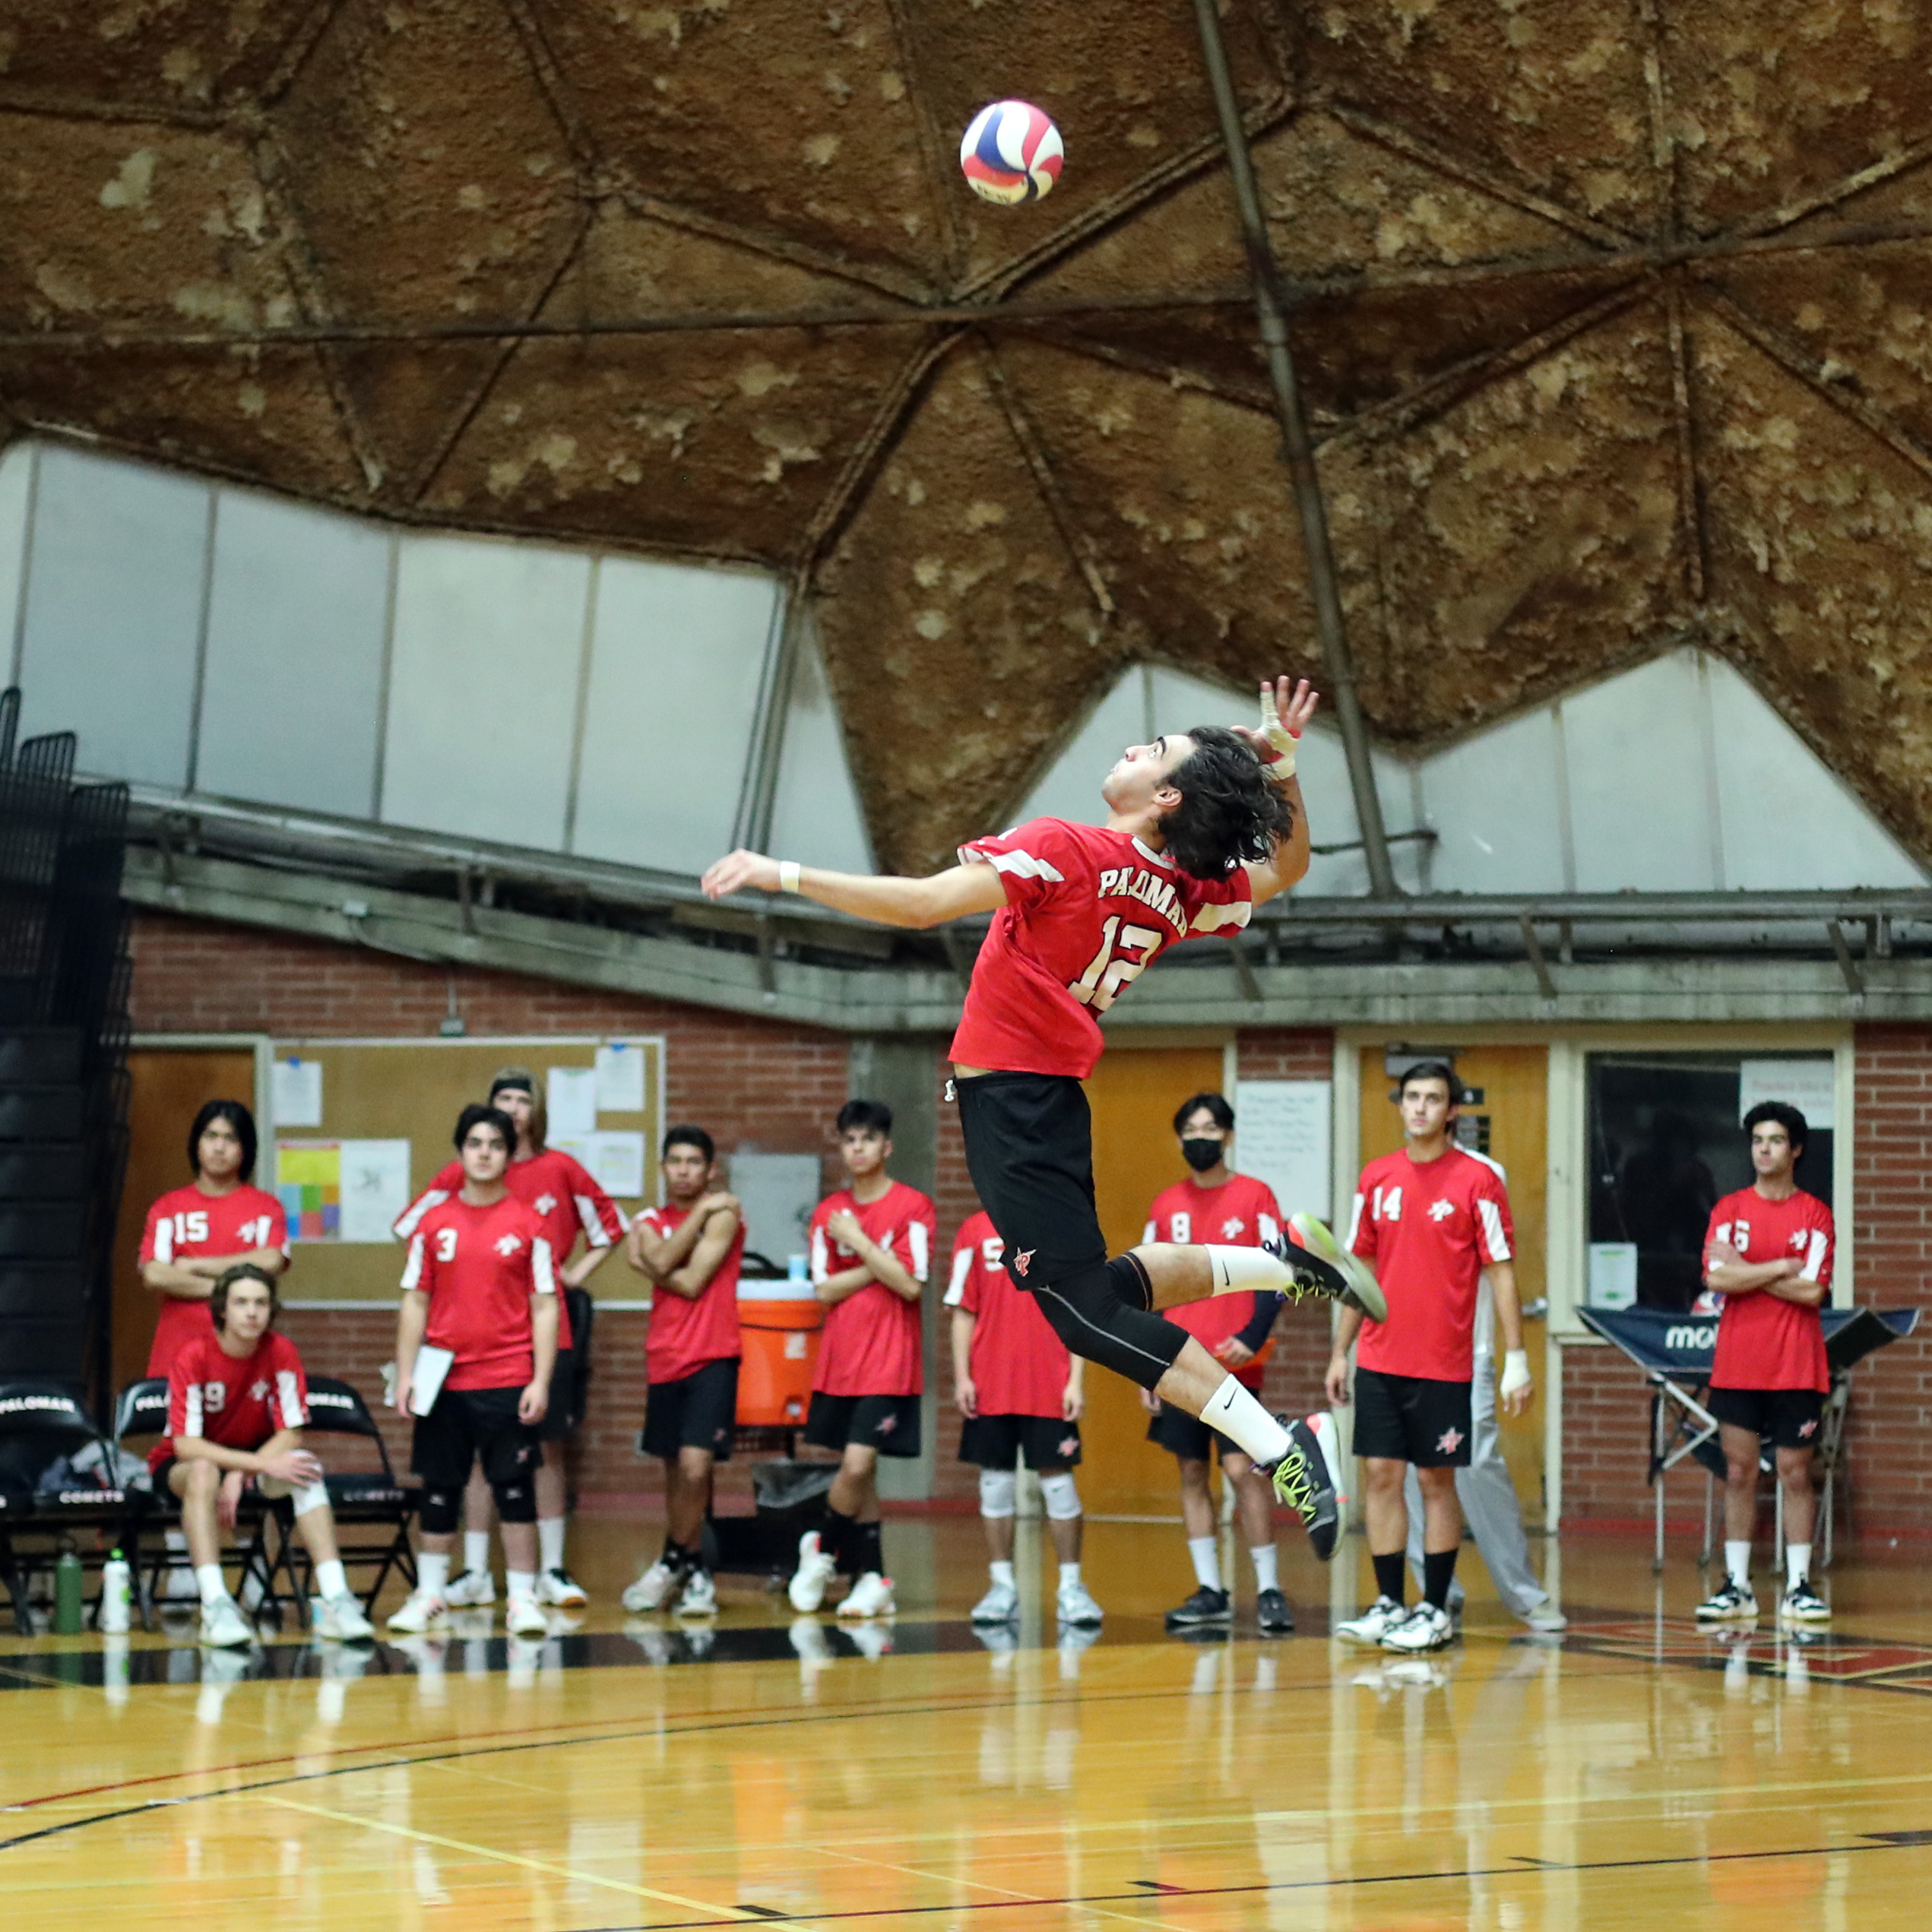 The Palomar men's volleyball team in their recent game on Feb. 9, 2022 against Fullerton college. (Photo courtesy of Hugh Cox)